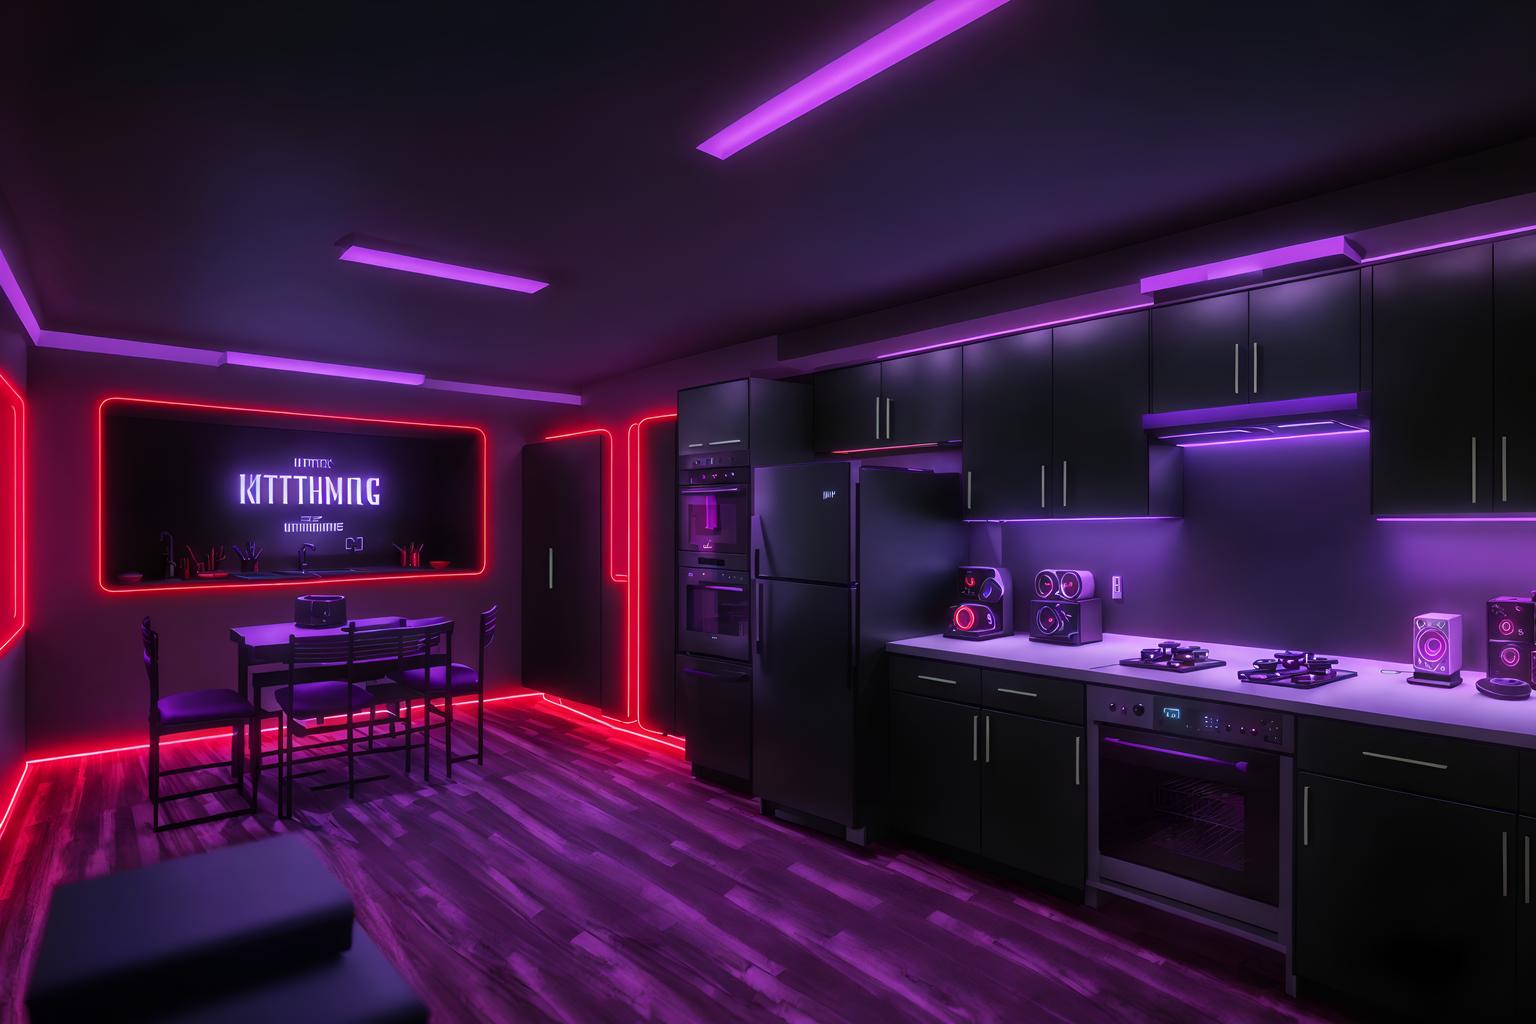 gaming room-style (kitchen interior) with worktops and plant and sink and kitchen cabinets and refrigerator and stove and worktops. . with multiple displays and dark room and speakers and neon letters on wall and purple and red lights and purple, red and blue fade light and gaming chair and at night. . cinematic photo, highly detailed, cinematic lighting, ultra-detailed, ultrarealistic, photorealism, 8k. gaming room interior design style. masterpiece, cinematic light, ultrarealistic+, photorealistic+, 8k, raw photo, realistic, sharp focus on eyes, (symmetrical eyes), (intact eyes), hyperrealistic, highest quality, best quality, , highly detailed, masterpiece, best quality, extremely detailed 8k wallpaper, masterpiece, best quality, ultra-detailed, best shadow, detailed background, detailed face, detailed eyes, high contrast, best illumination, detailed face, dulux, caustic, dynamic angle, detailed glow. dramatic lighting. highly detailed, insanely detailed hair, symmetrical, intricate details, professionally retouched, 8k high definition. strong bokeh. award winning photo.